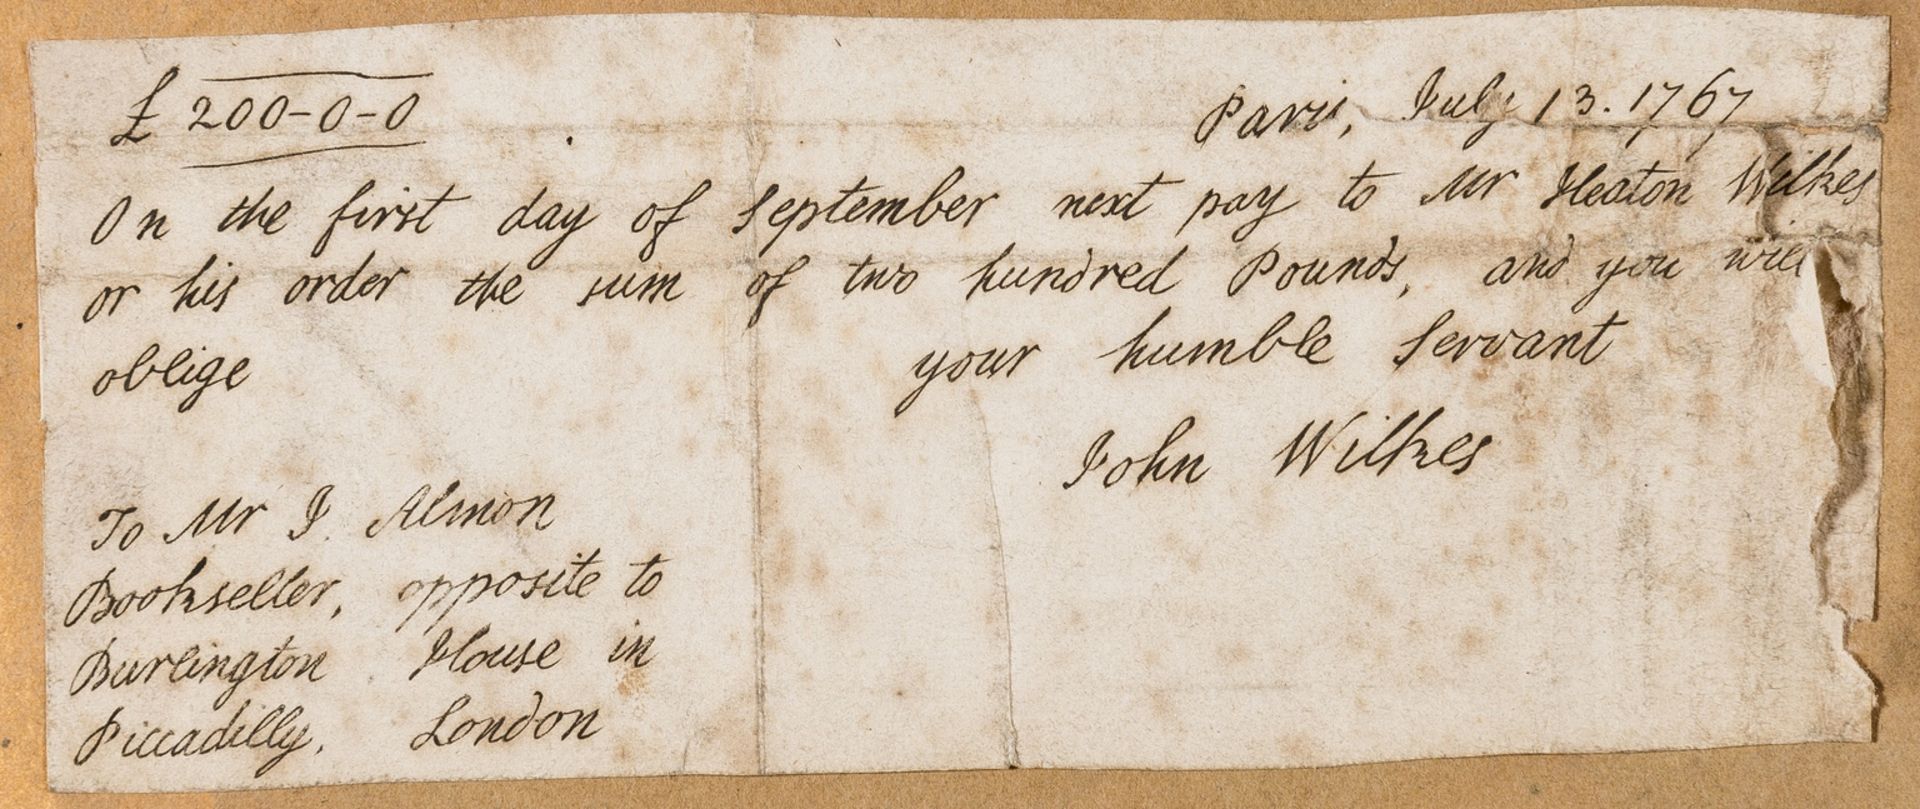 Wilkes (John) Autograph note signed to "Mr J. Almon, Bookseller", 1767. - Image 2 of 2